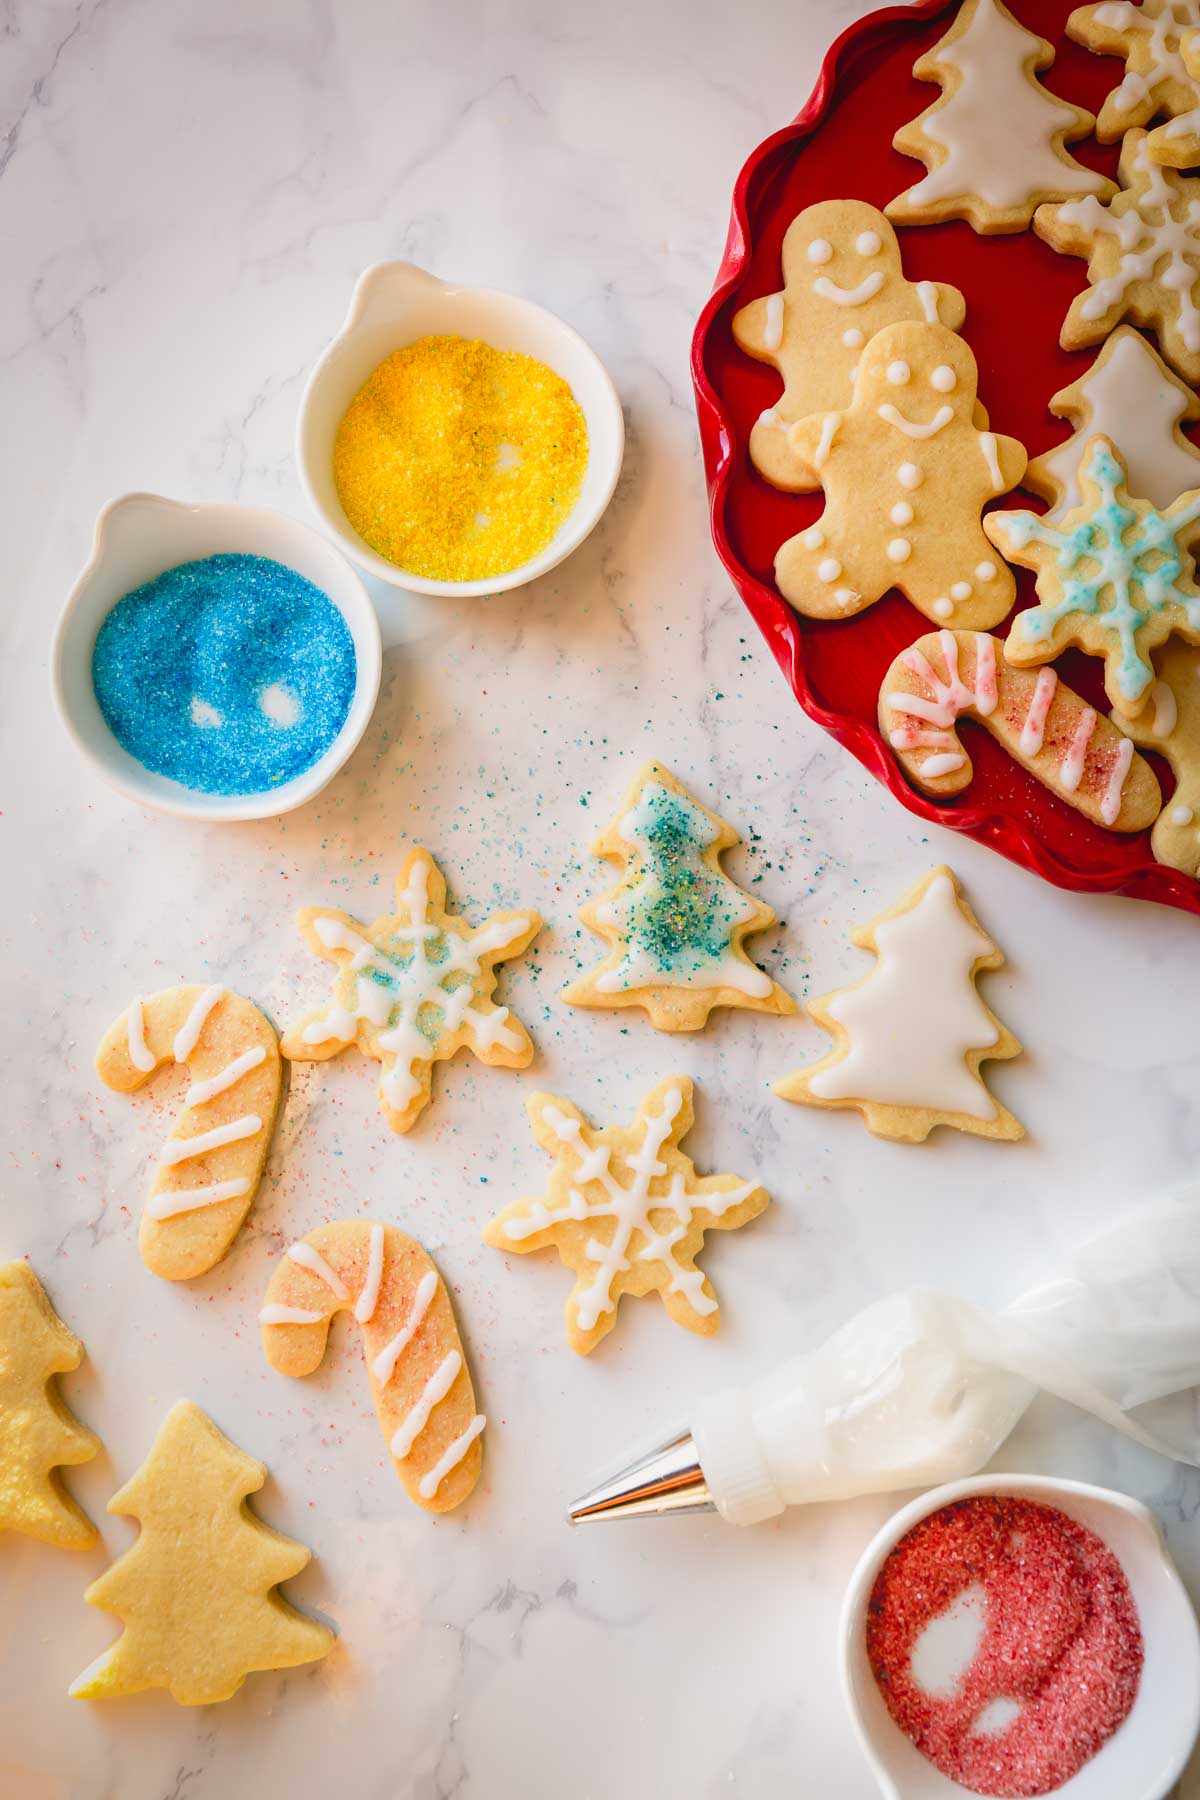 Glazed and decorated sugar cookies.